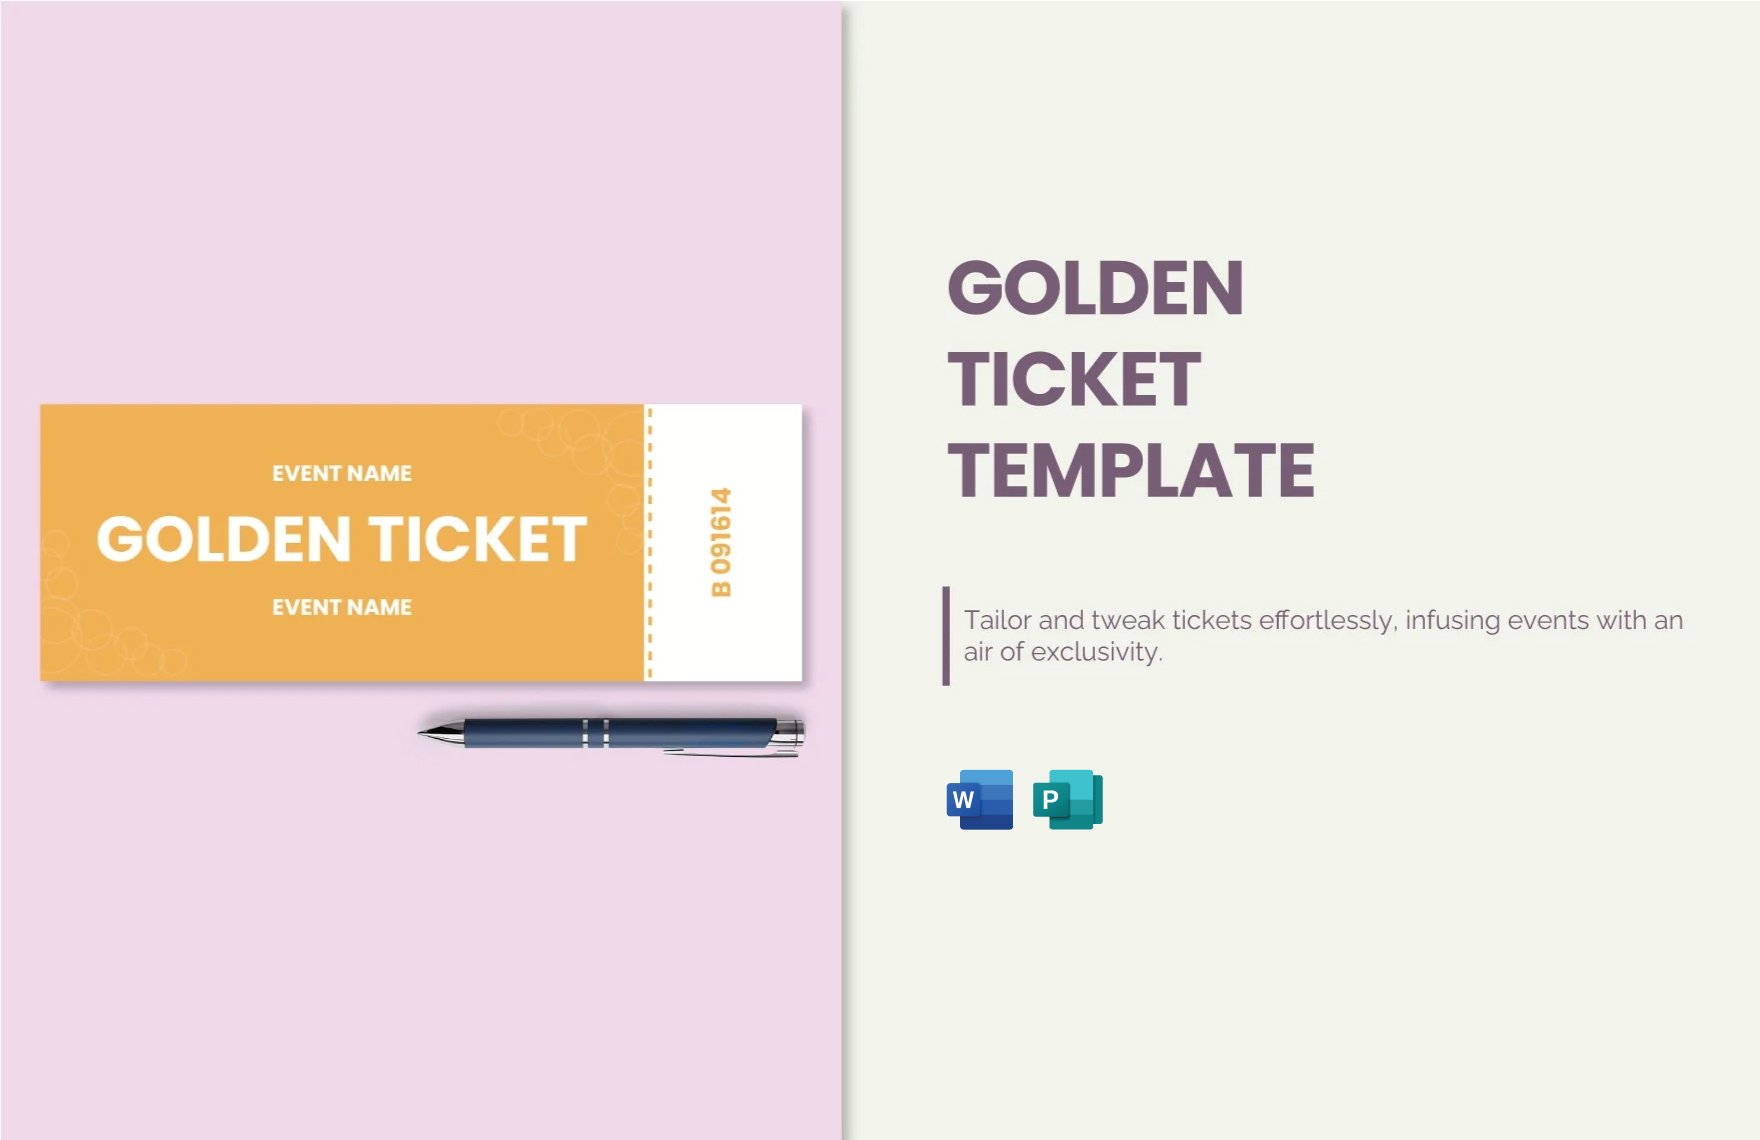 Golden Ticket Template in Word, Publisher